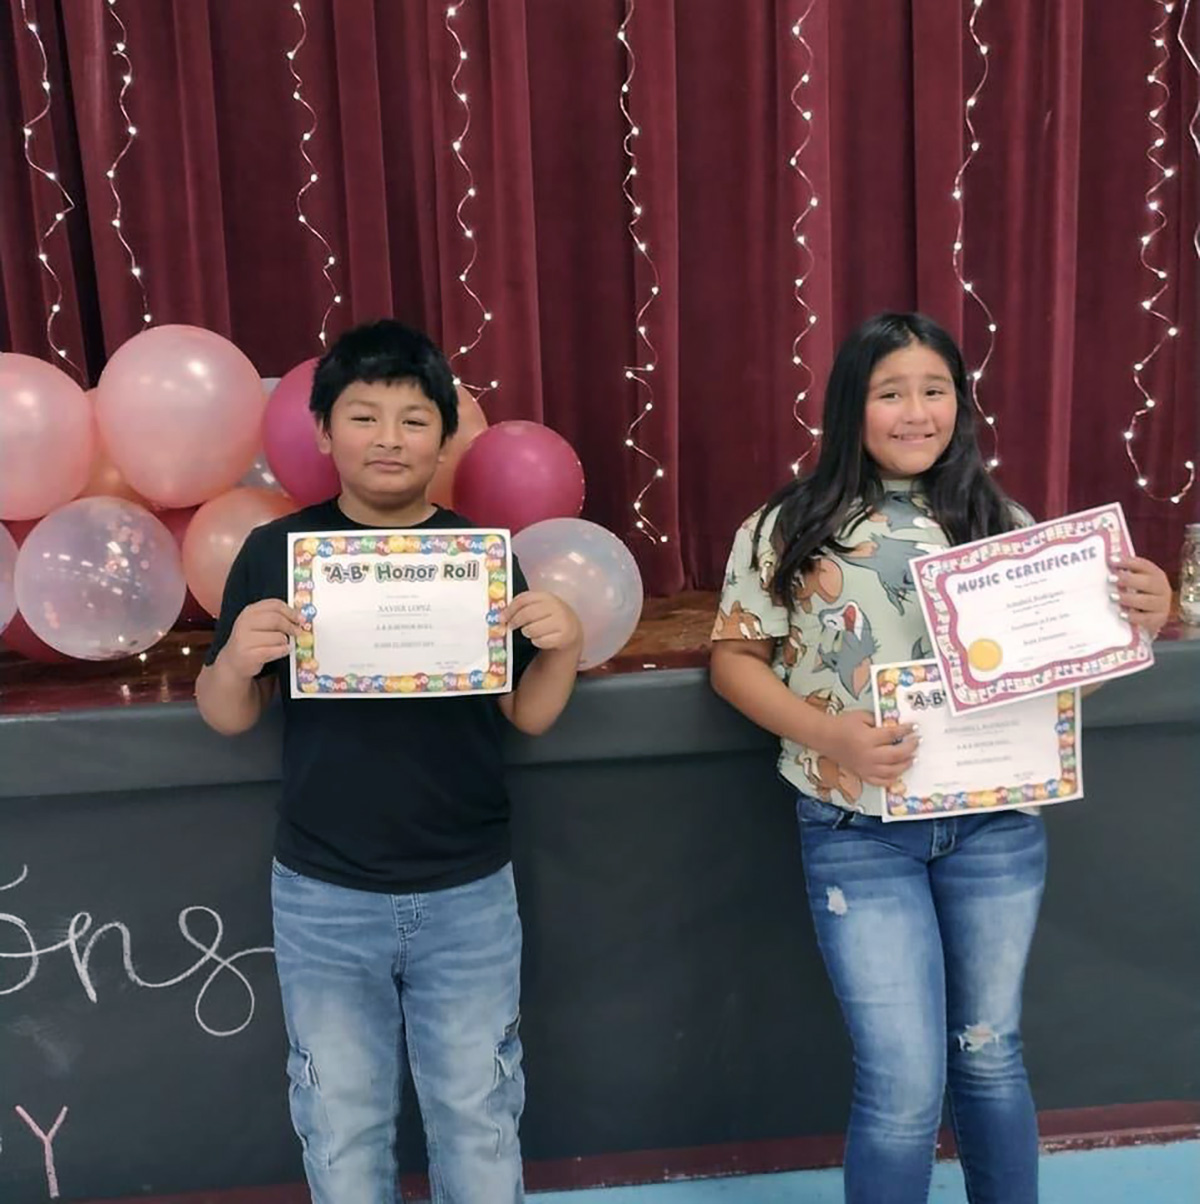 PHOTO: Xavier Lopez, left, poses with his honor roll certificate at Uvalde Elementary School with his girlfriend and classmate Annabell Guadalupe Rodriguez, on May 24, 2022, the day of the shooting.